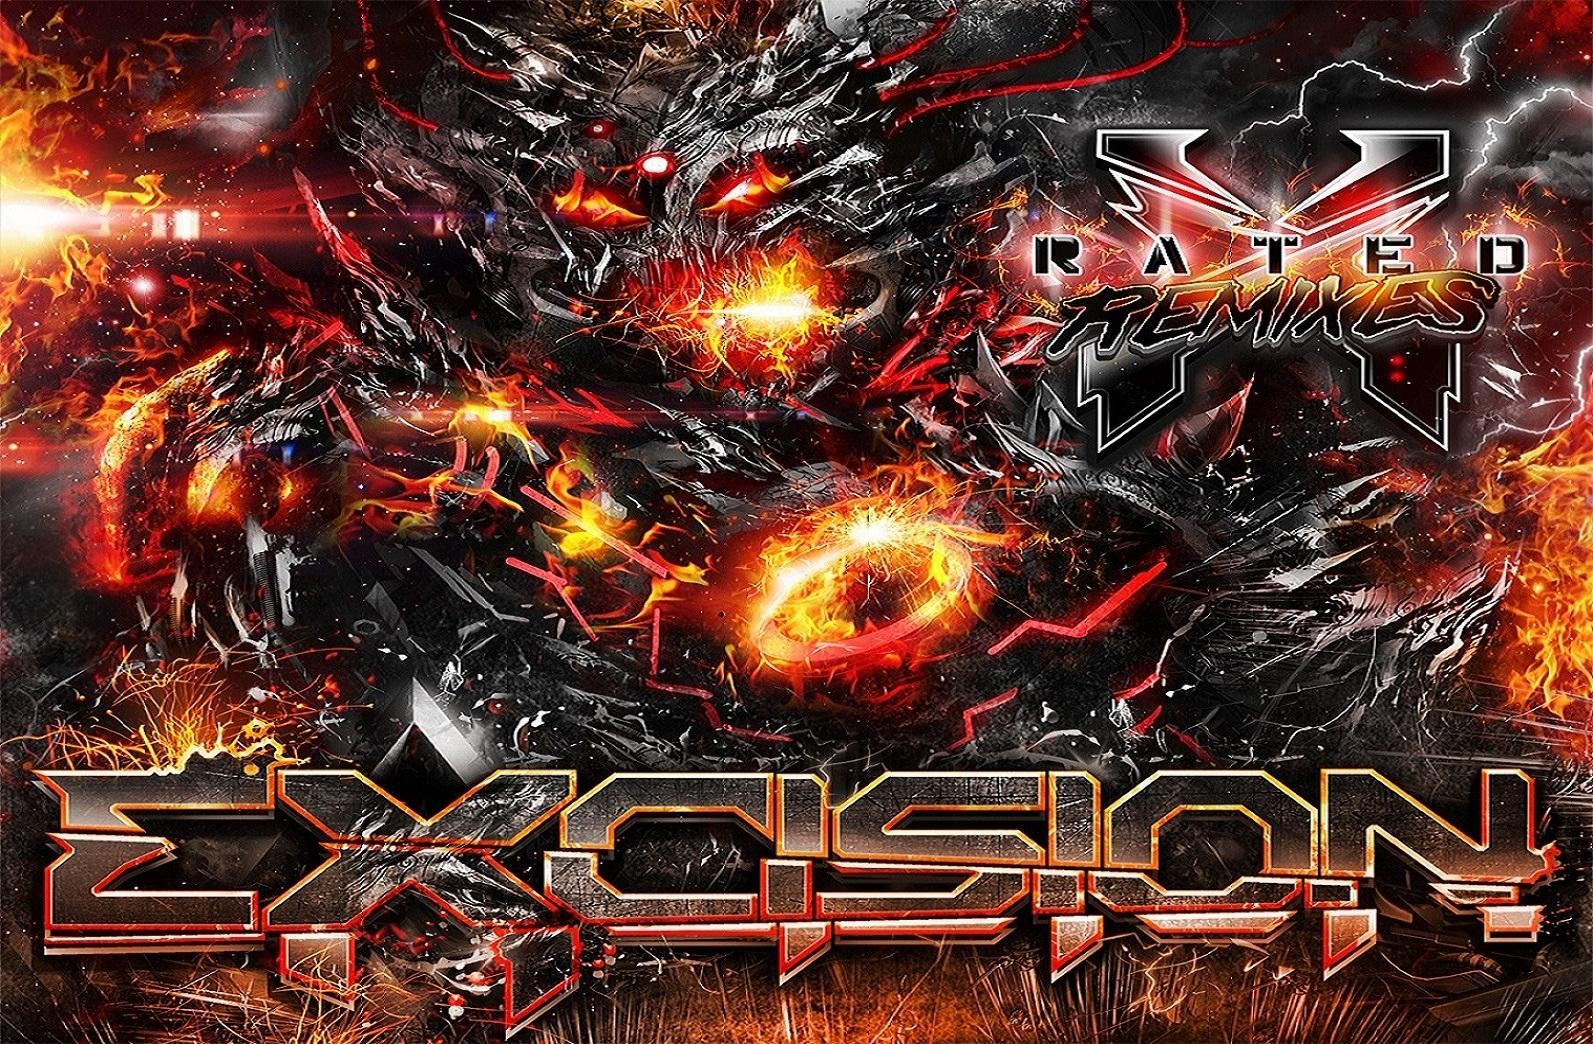 EXCISION X RATED REMIXES WALLPAPER - - HD Wallpapers